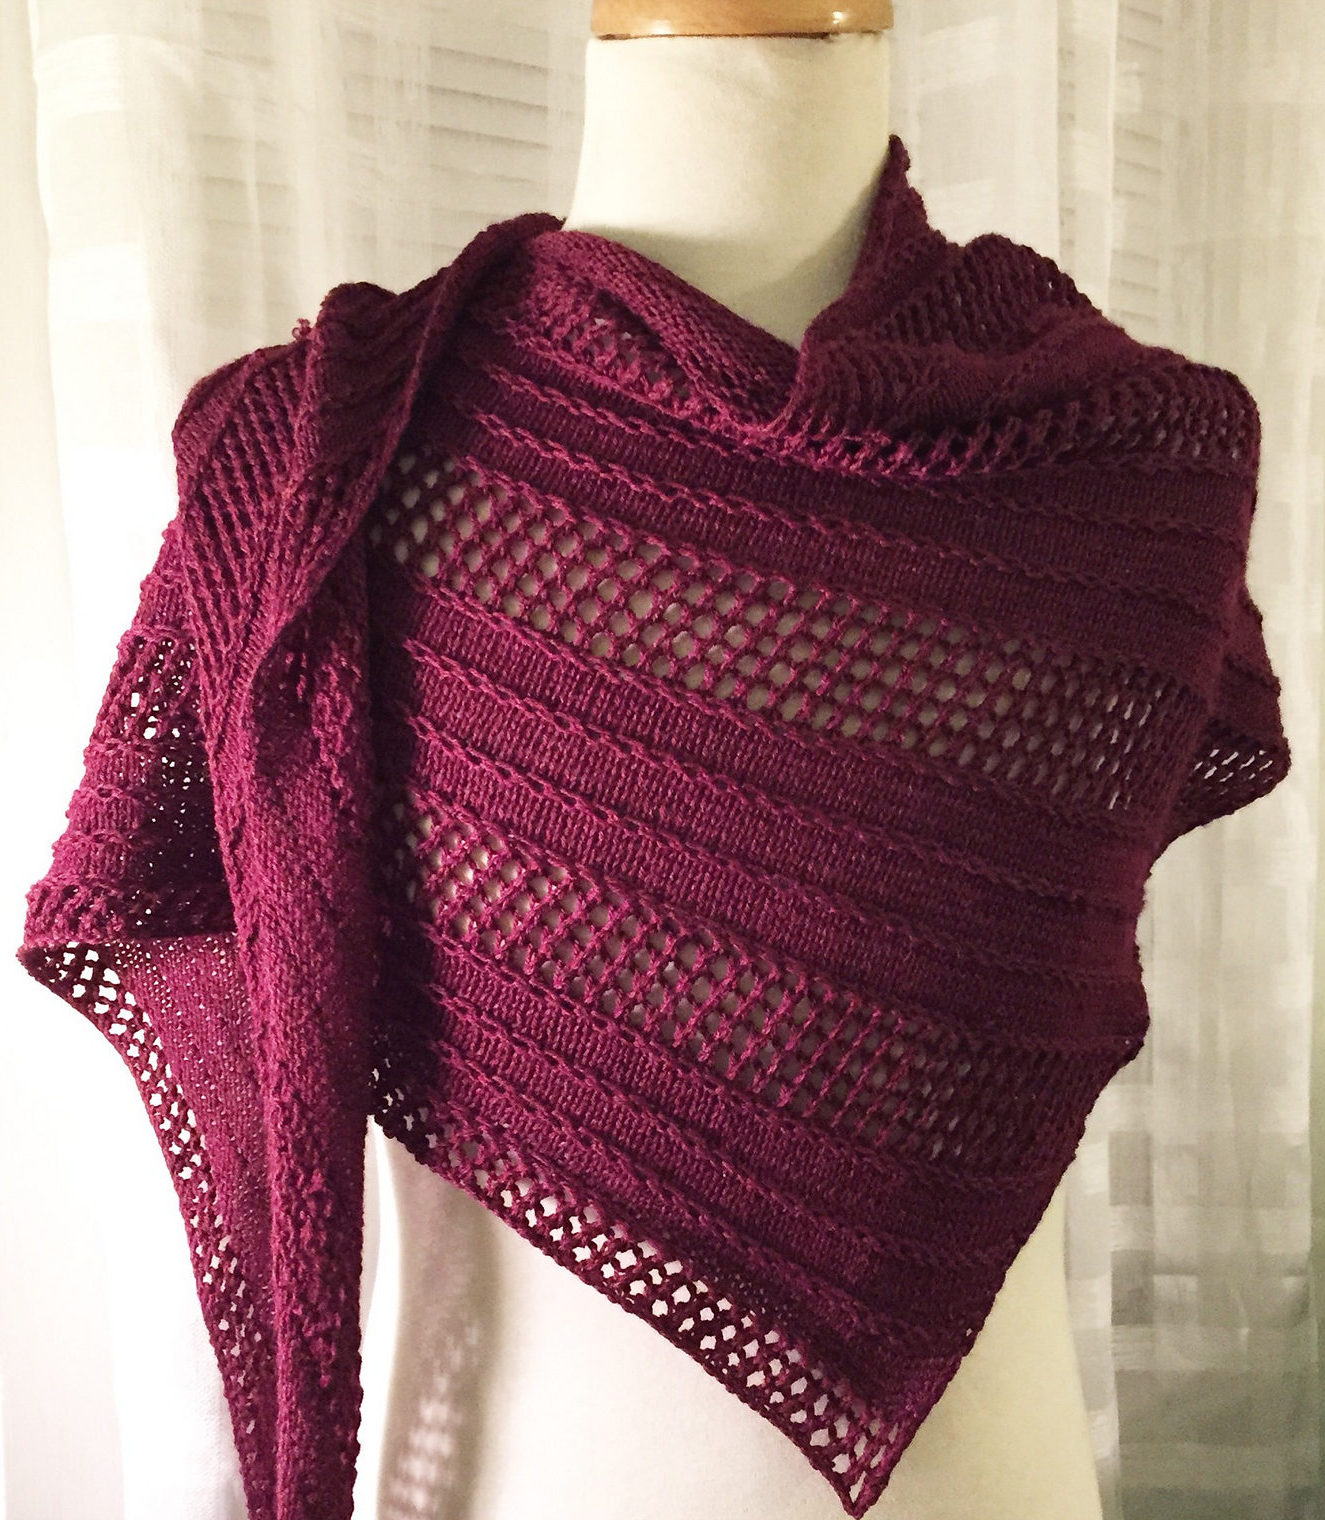 Textured Shawl Knitting Patterns | In the Loop Knitting